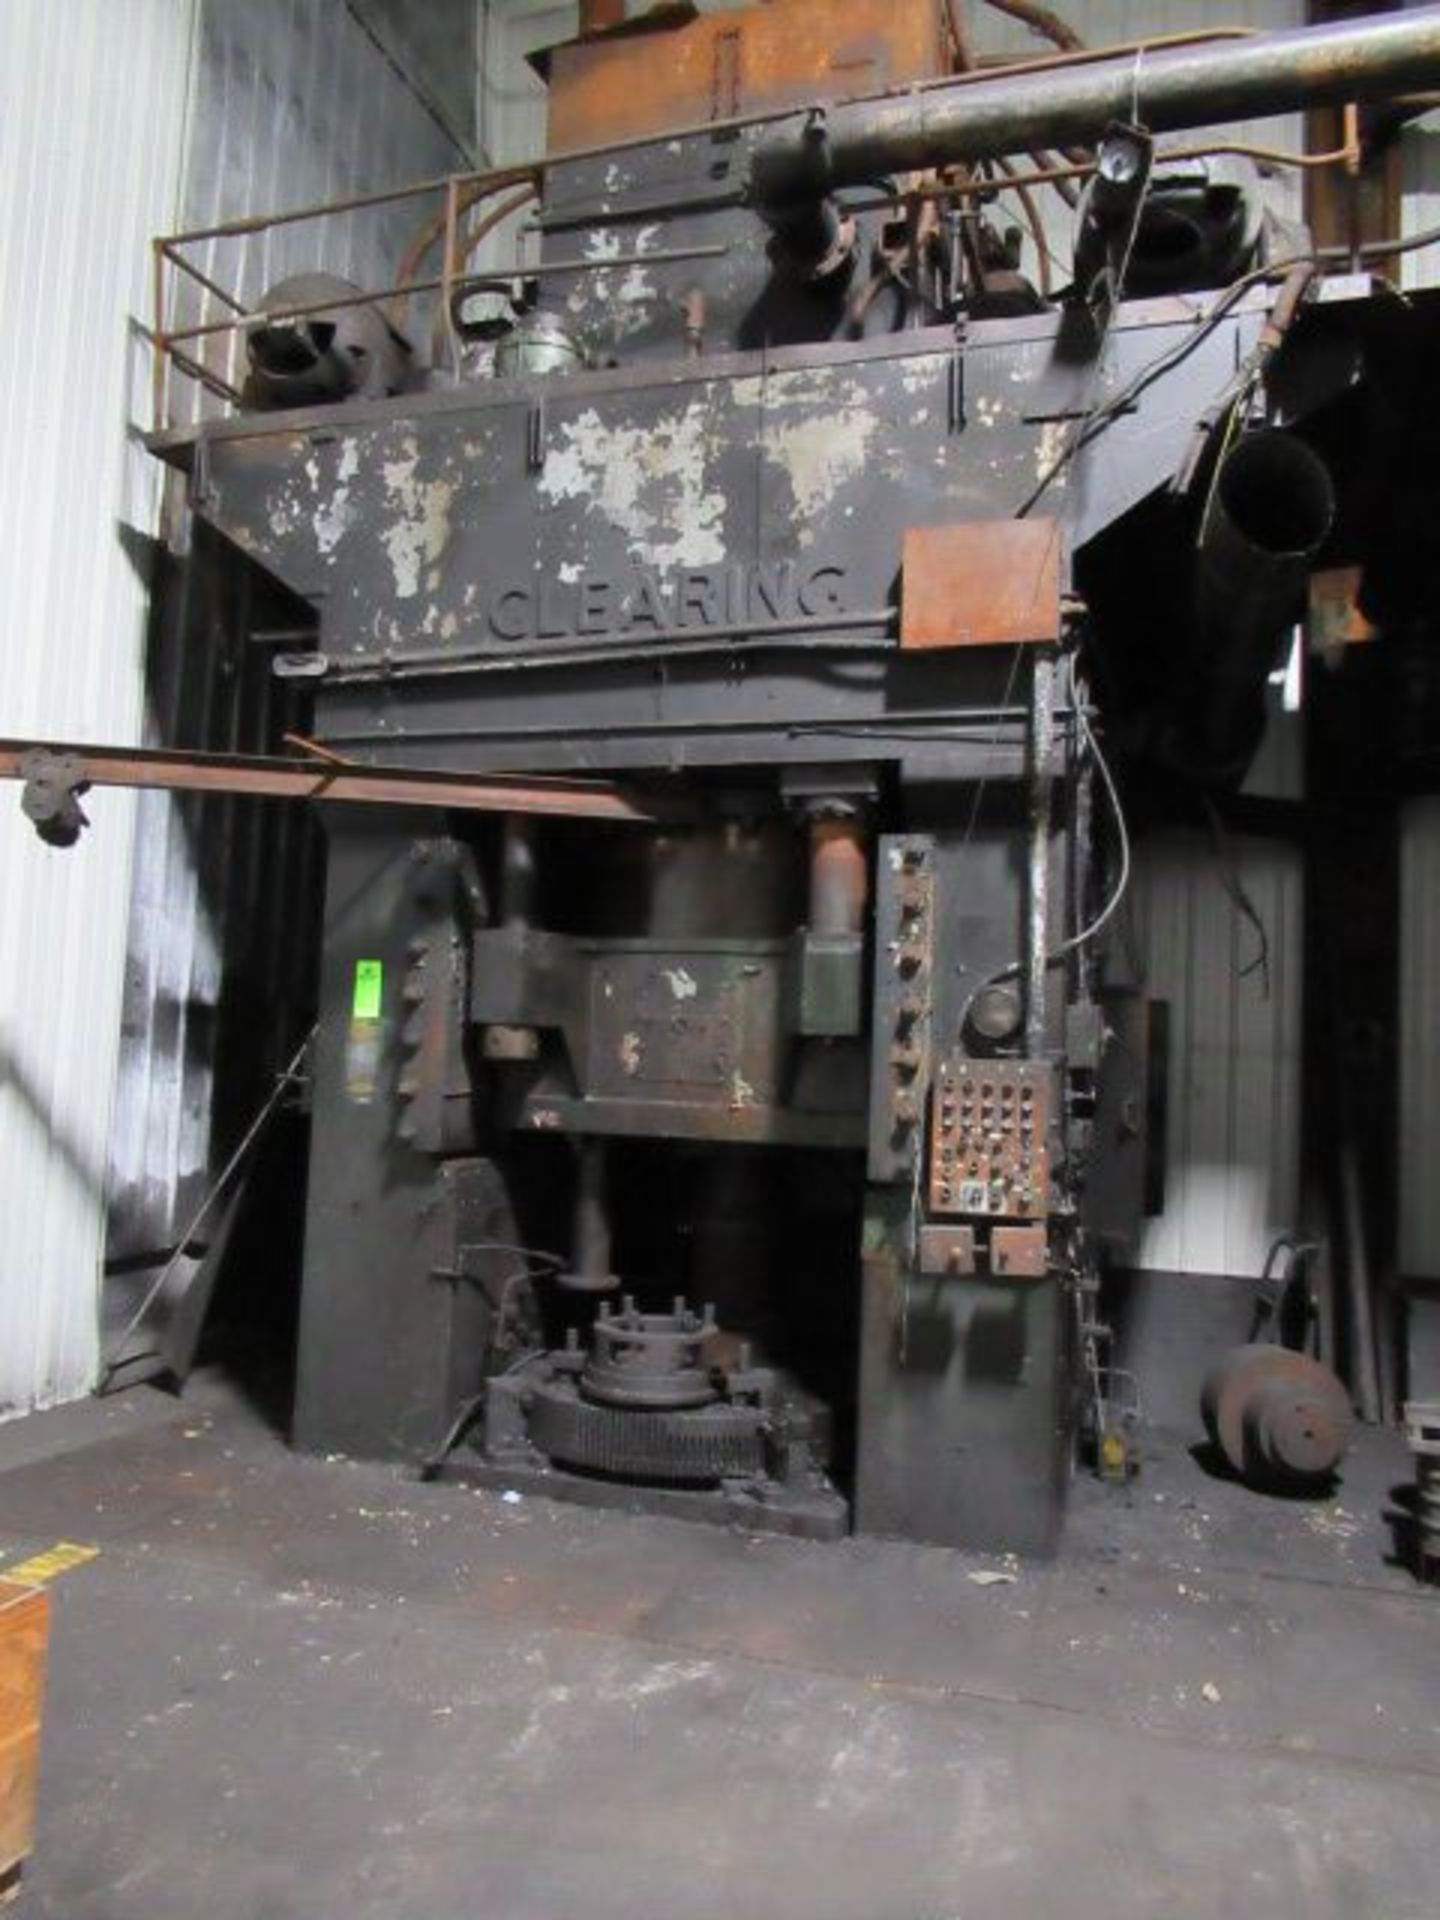 Clearing H-3000-60 Hydraulic Forging Press w/ 18" Stk, 50" S H, s/n 51-17248-P (Note: No Electrics